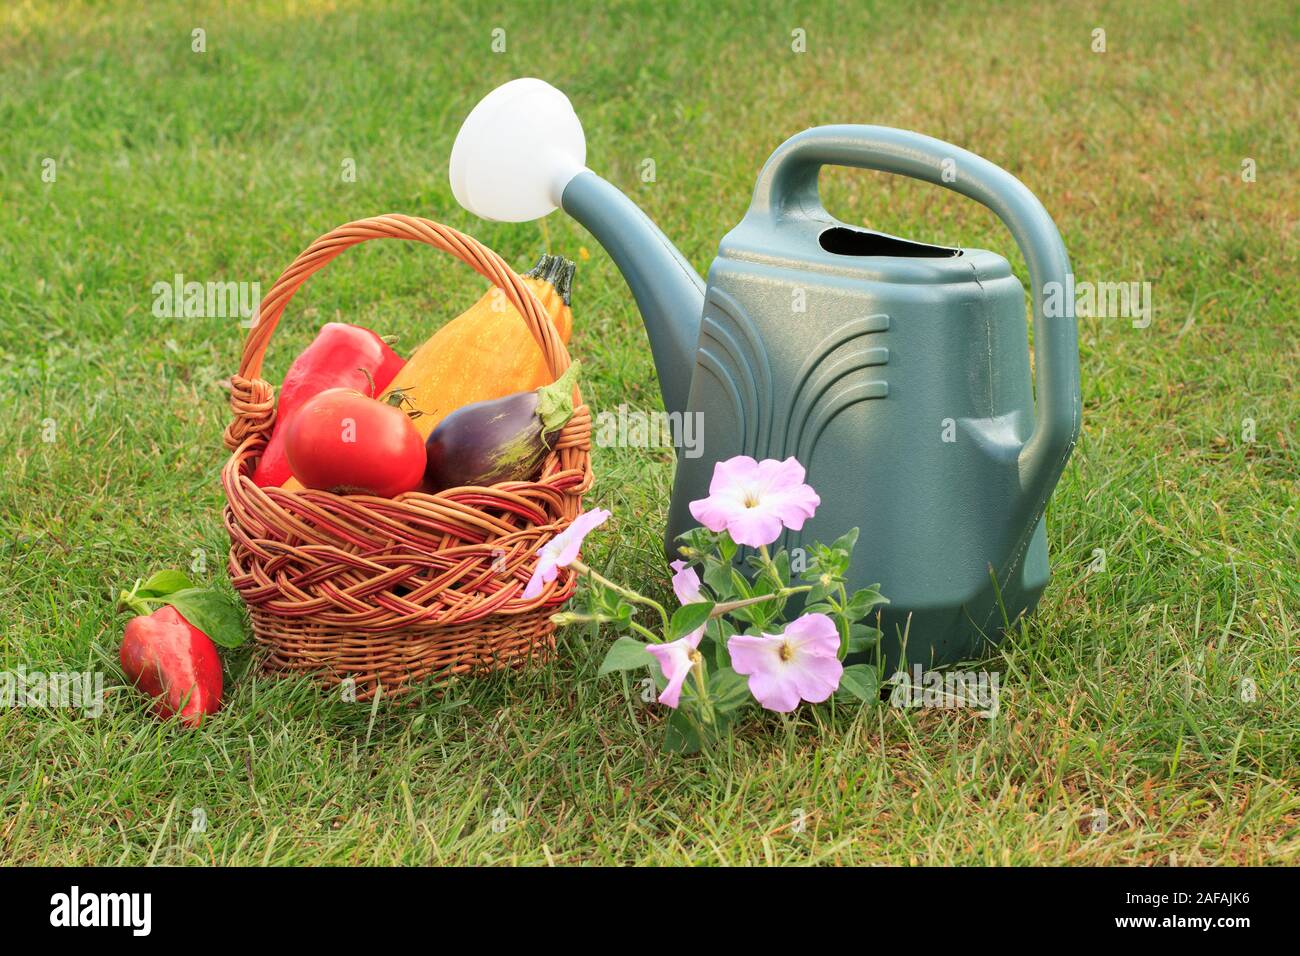 Just picked zucchini, eggplant, tomato and bell pepper with a wicker basket, watering can and flowers on green grass. Just harvested vegetables. Stock Photo